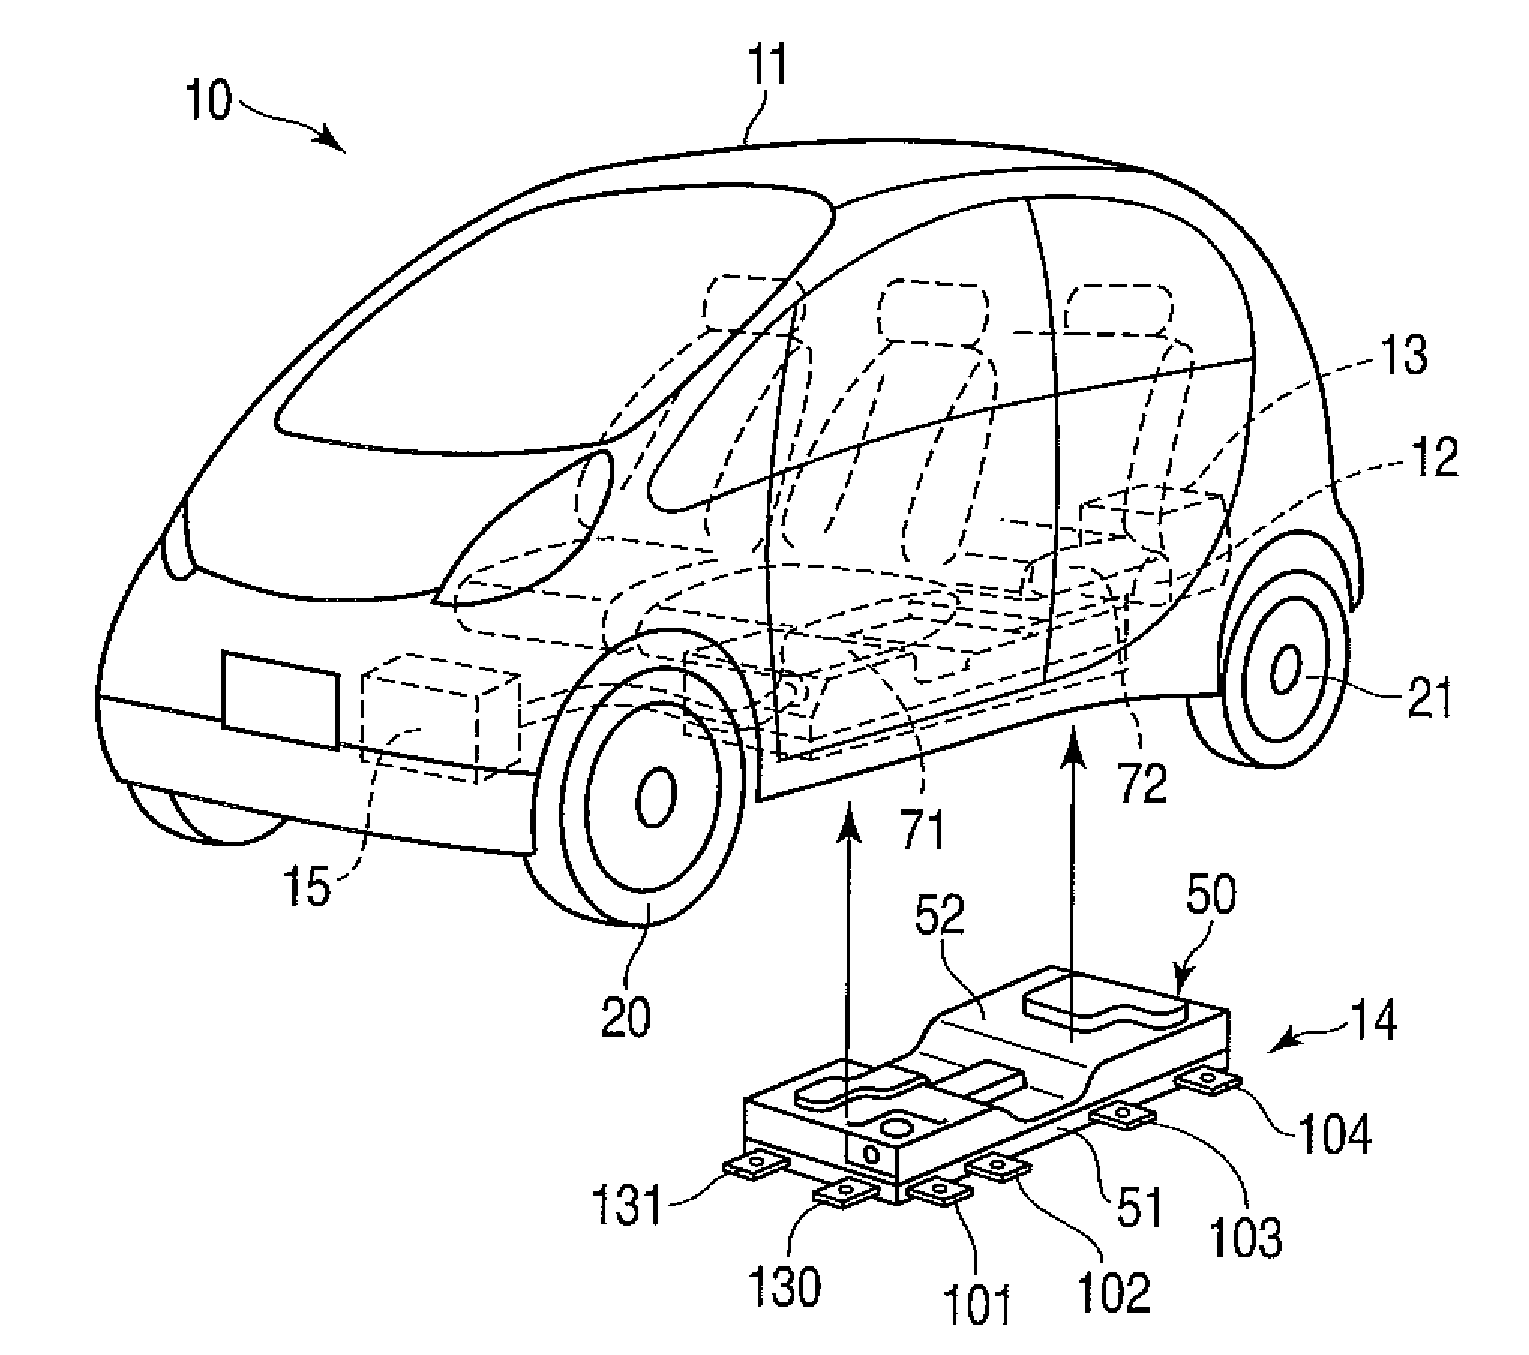 Battery unit mounting structure for electric vehicle